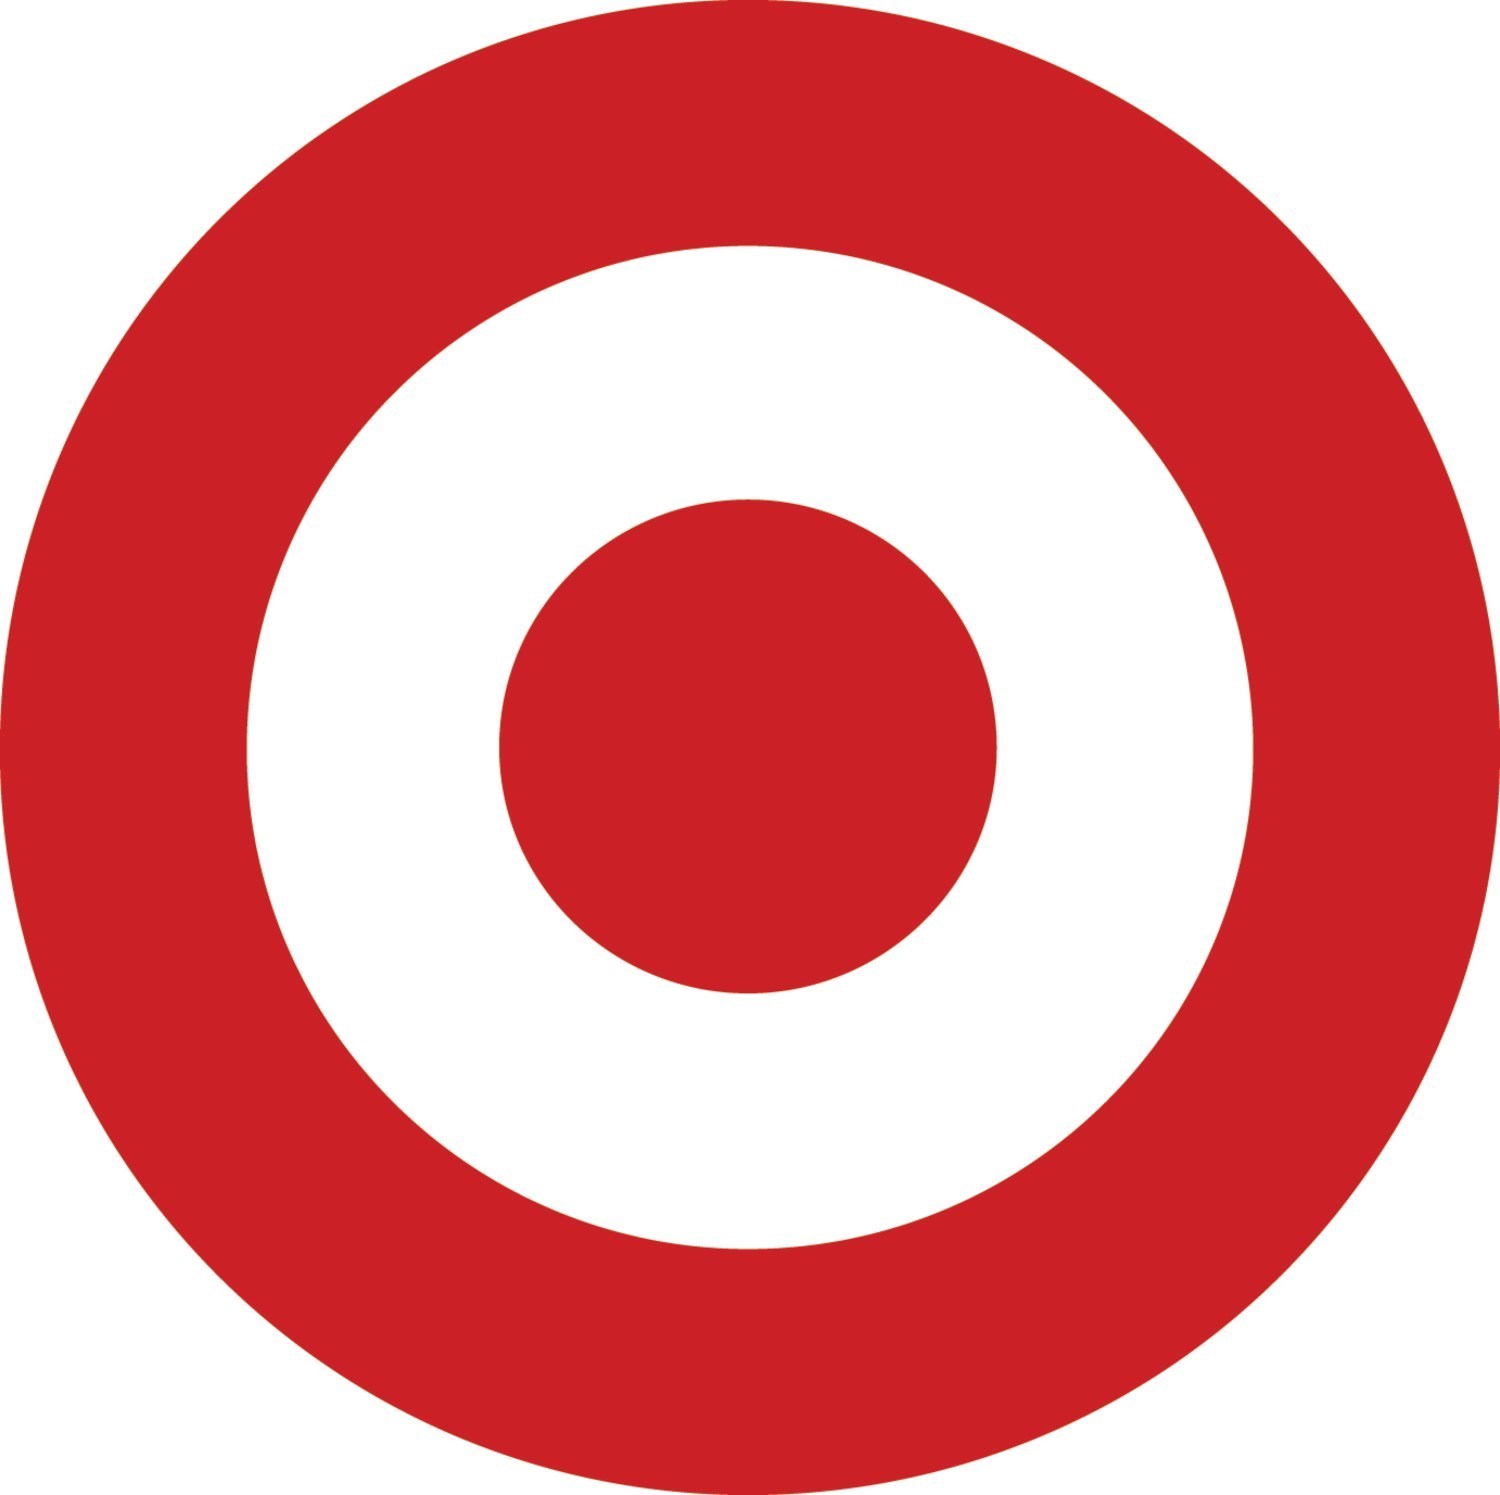 Target to Acquire Same-Day Delivery Platform Shipt, Inc ...